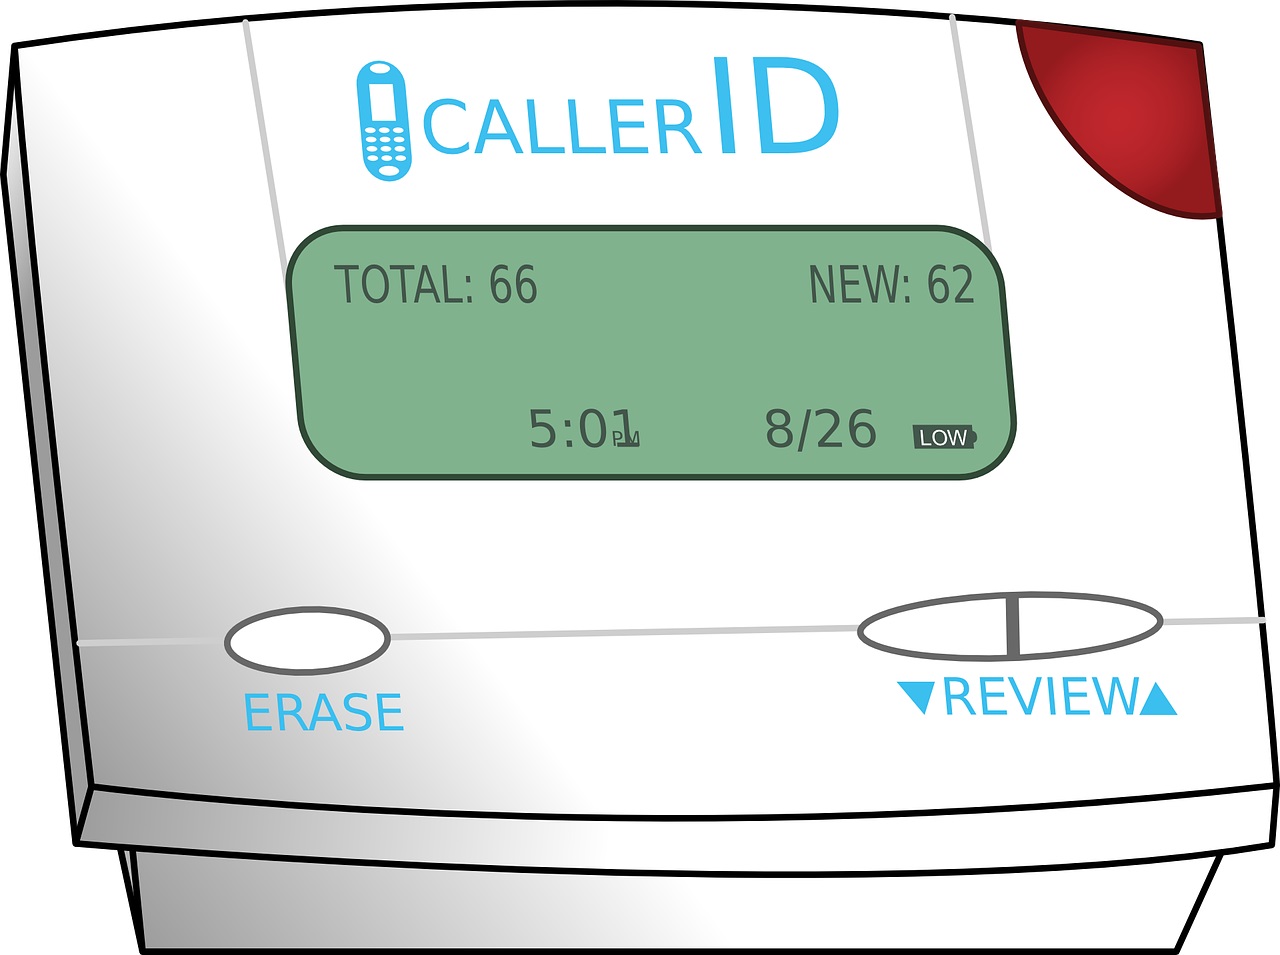 A Brazilian invented caller ID technology more than 25 years ago. Today he is in 40 lawsuits claiming for his royalties that, in total, are more than 25 billion dollars.